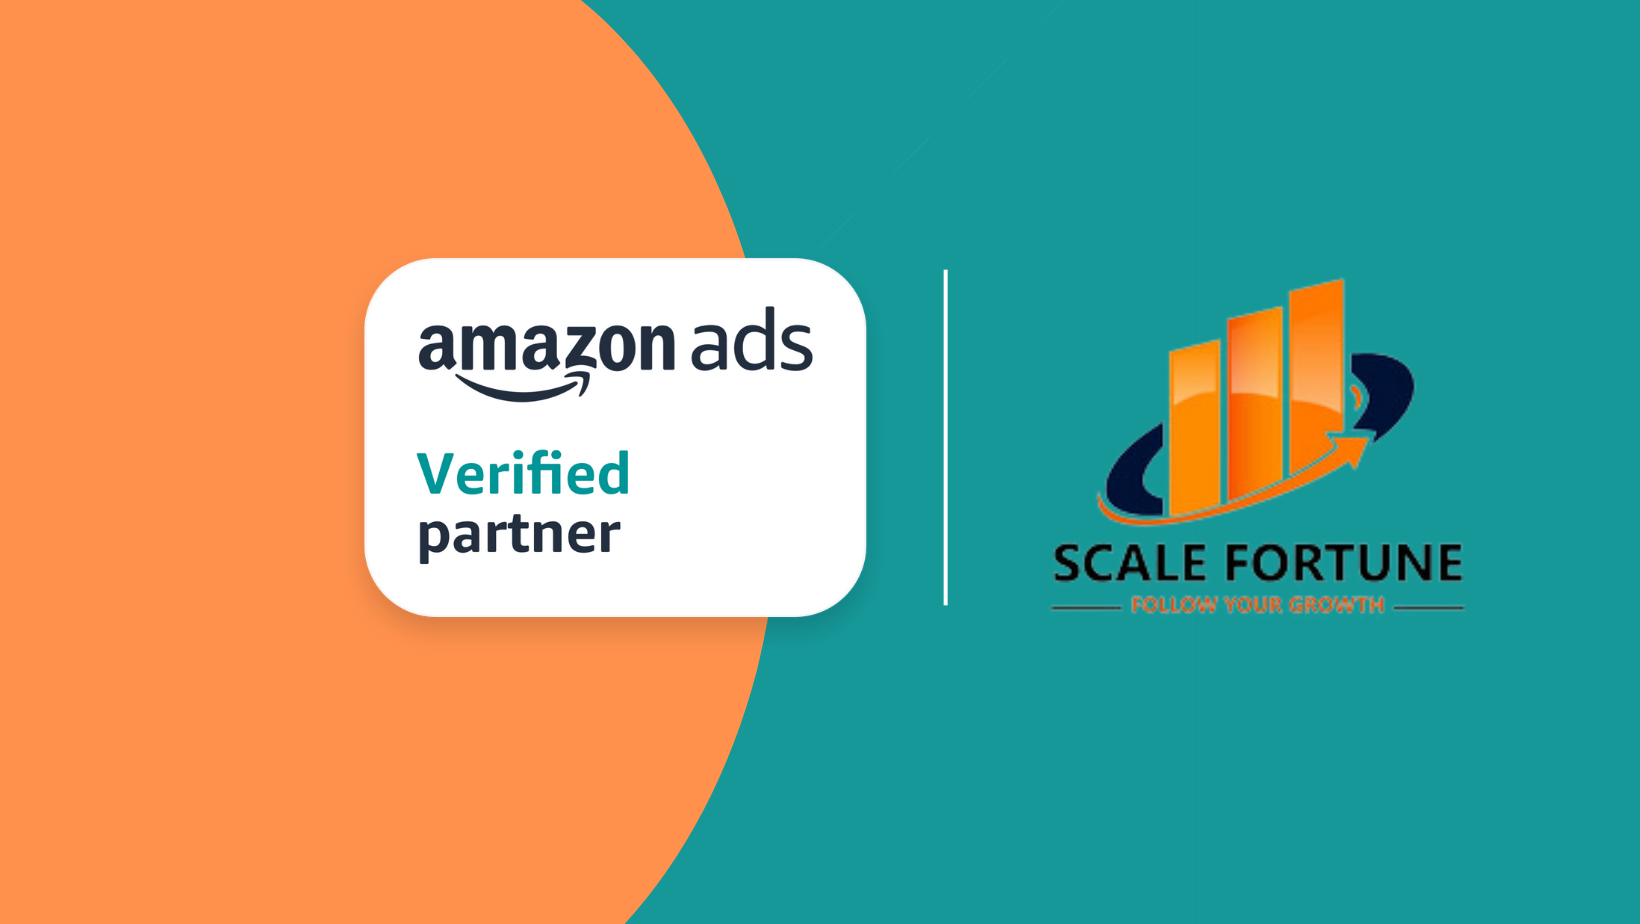 Scale fortune is Amazon ads verified partner